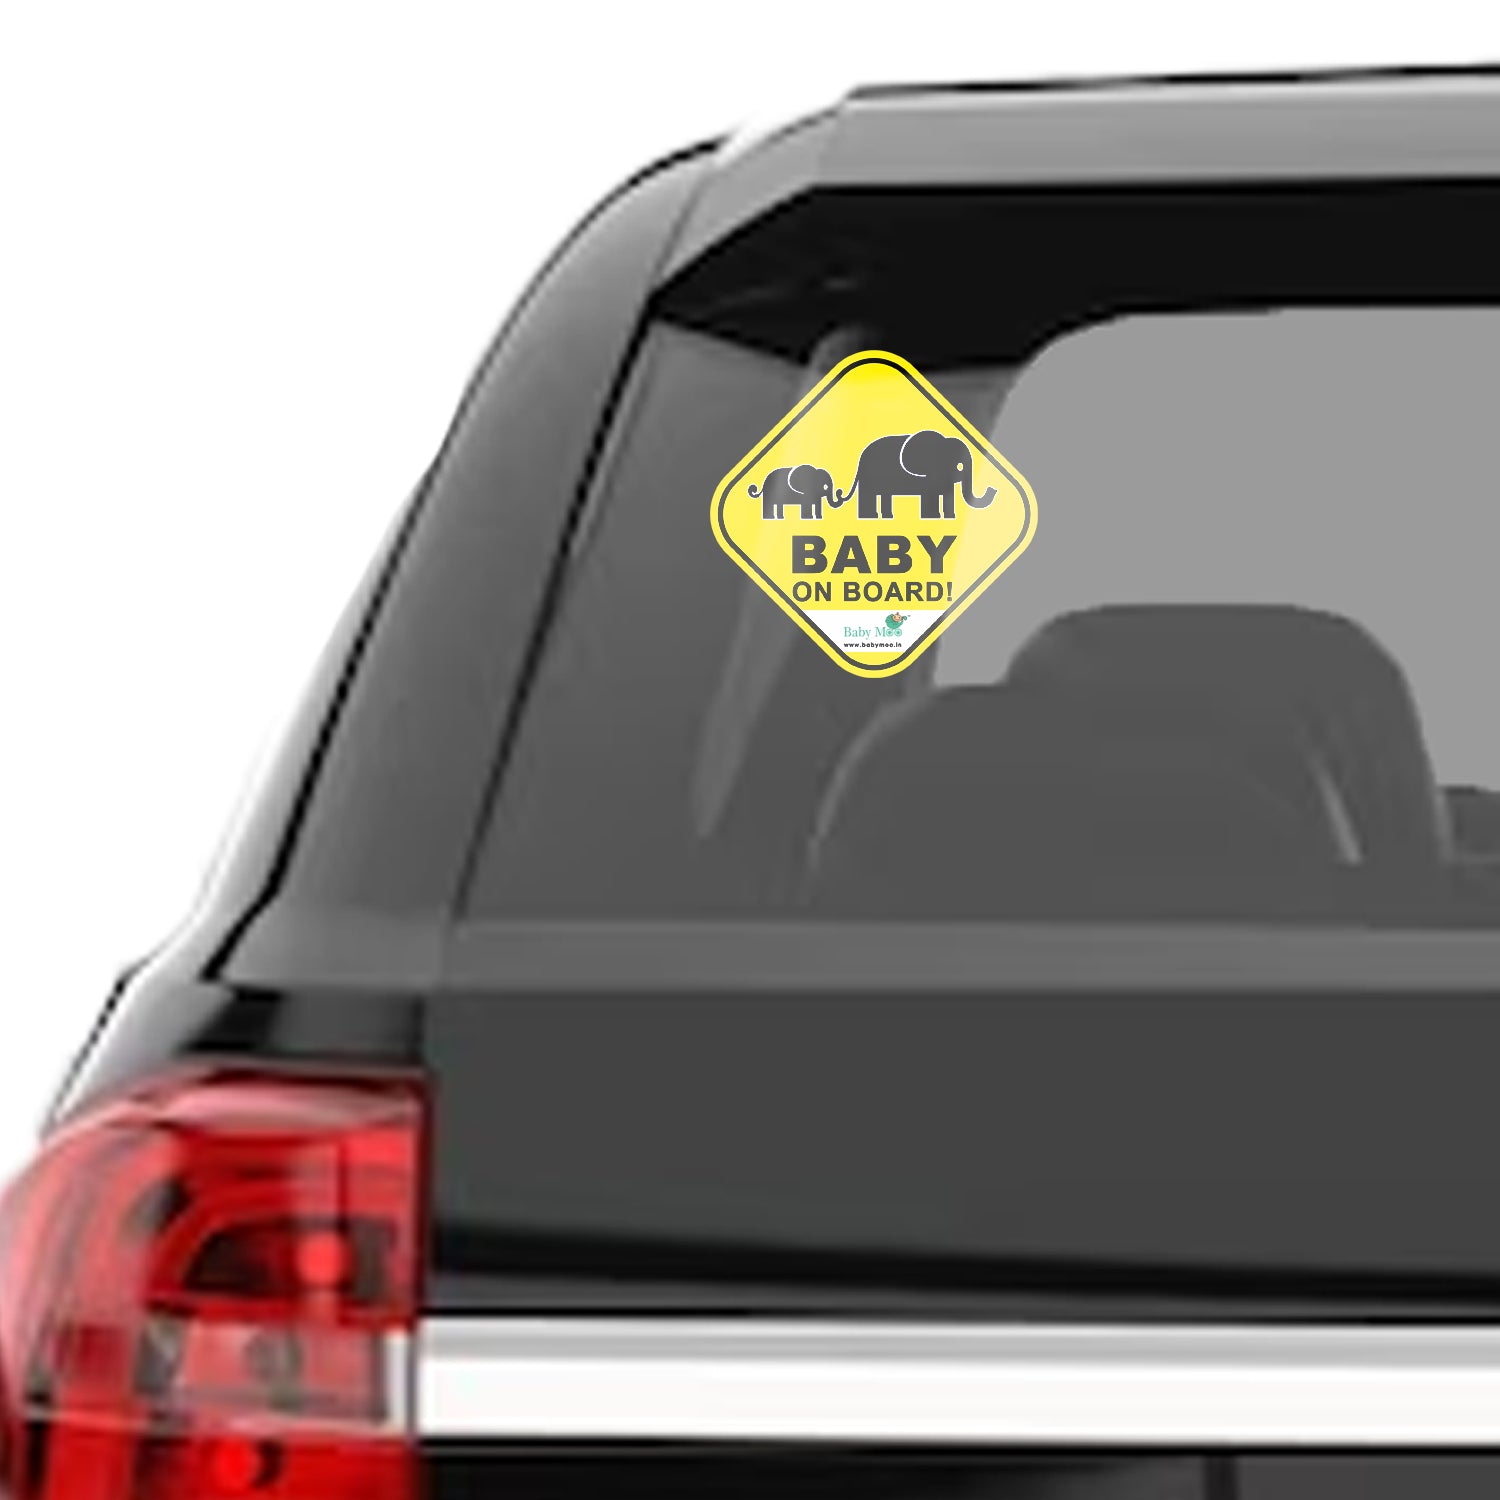 Baby Moo Car Safety Sign Twin Baby On Board With Suction Cup Clip 2 Pack - Yellow - Baby Moo